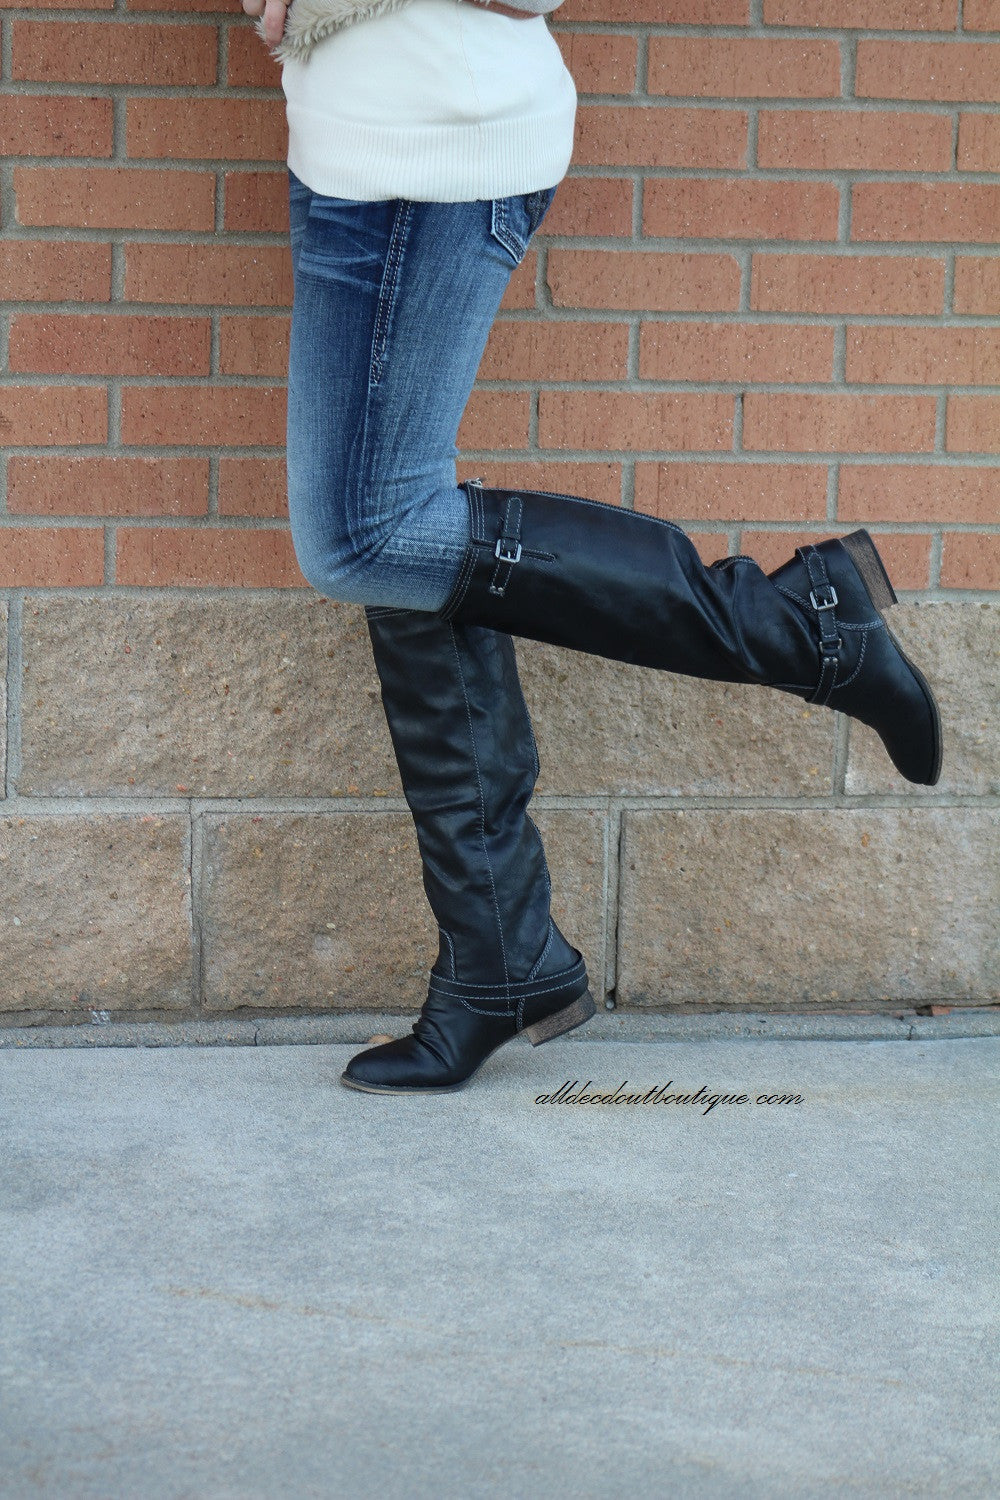 Breckelle's Outlaw Black Riding Boots